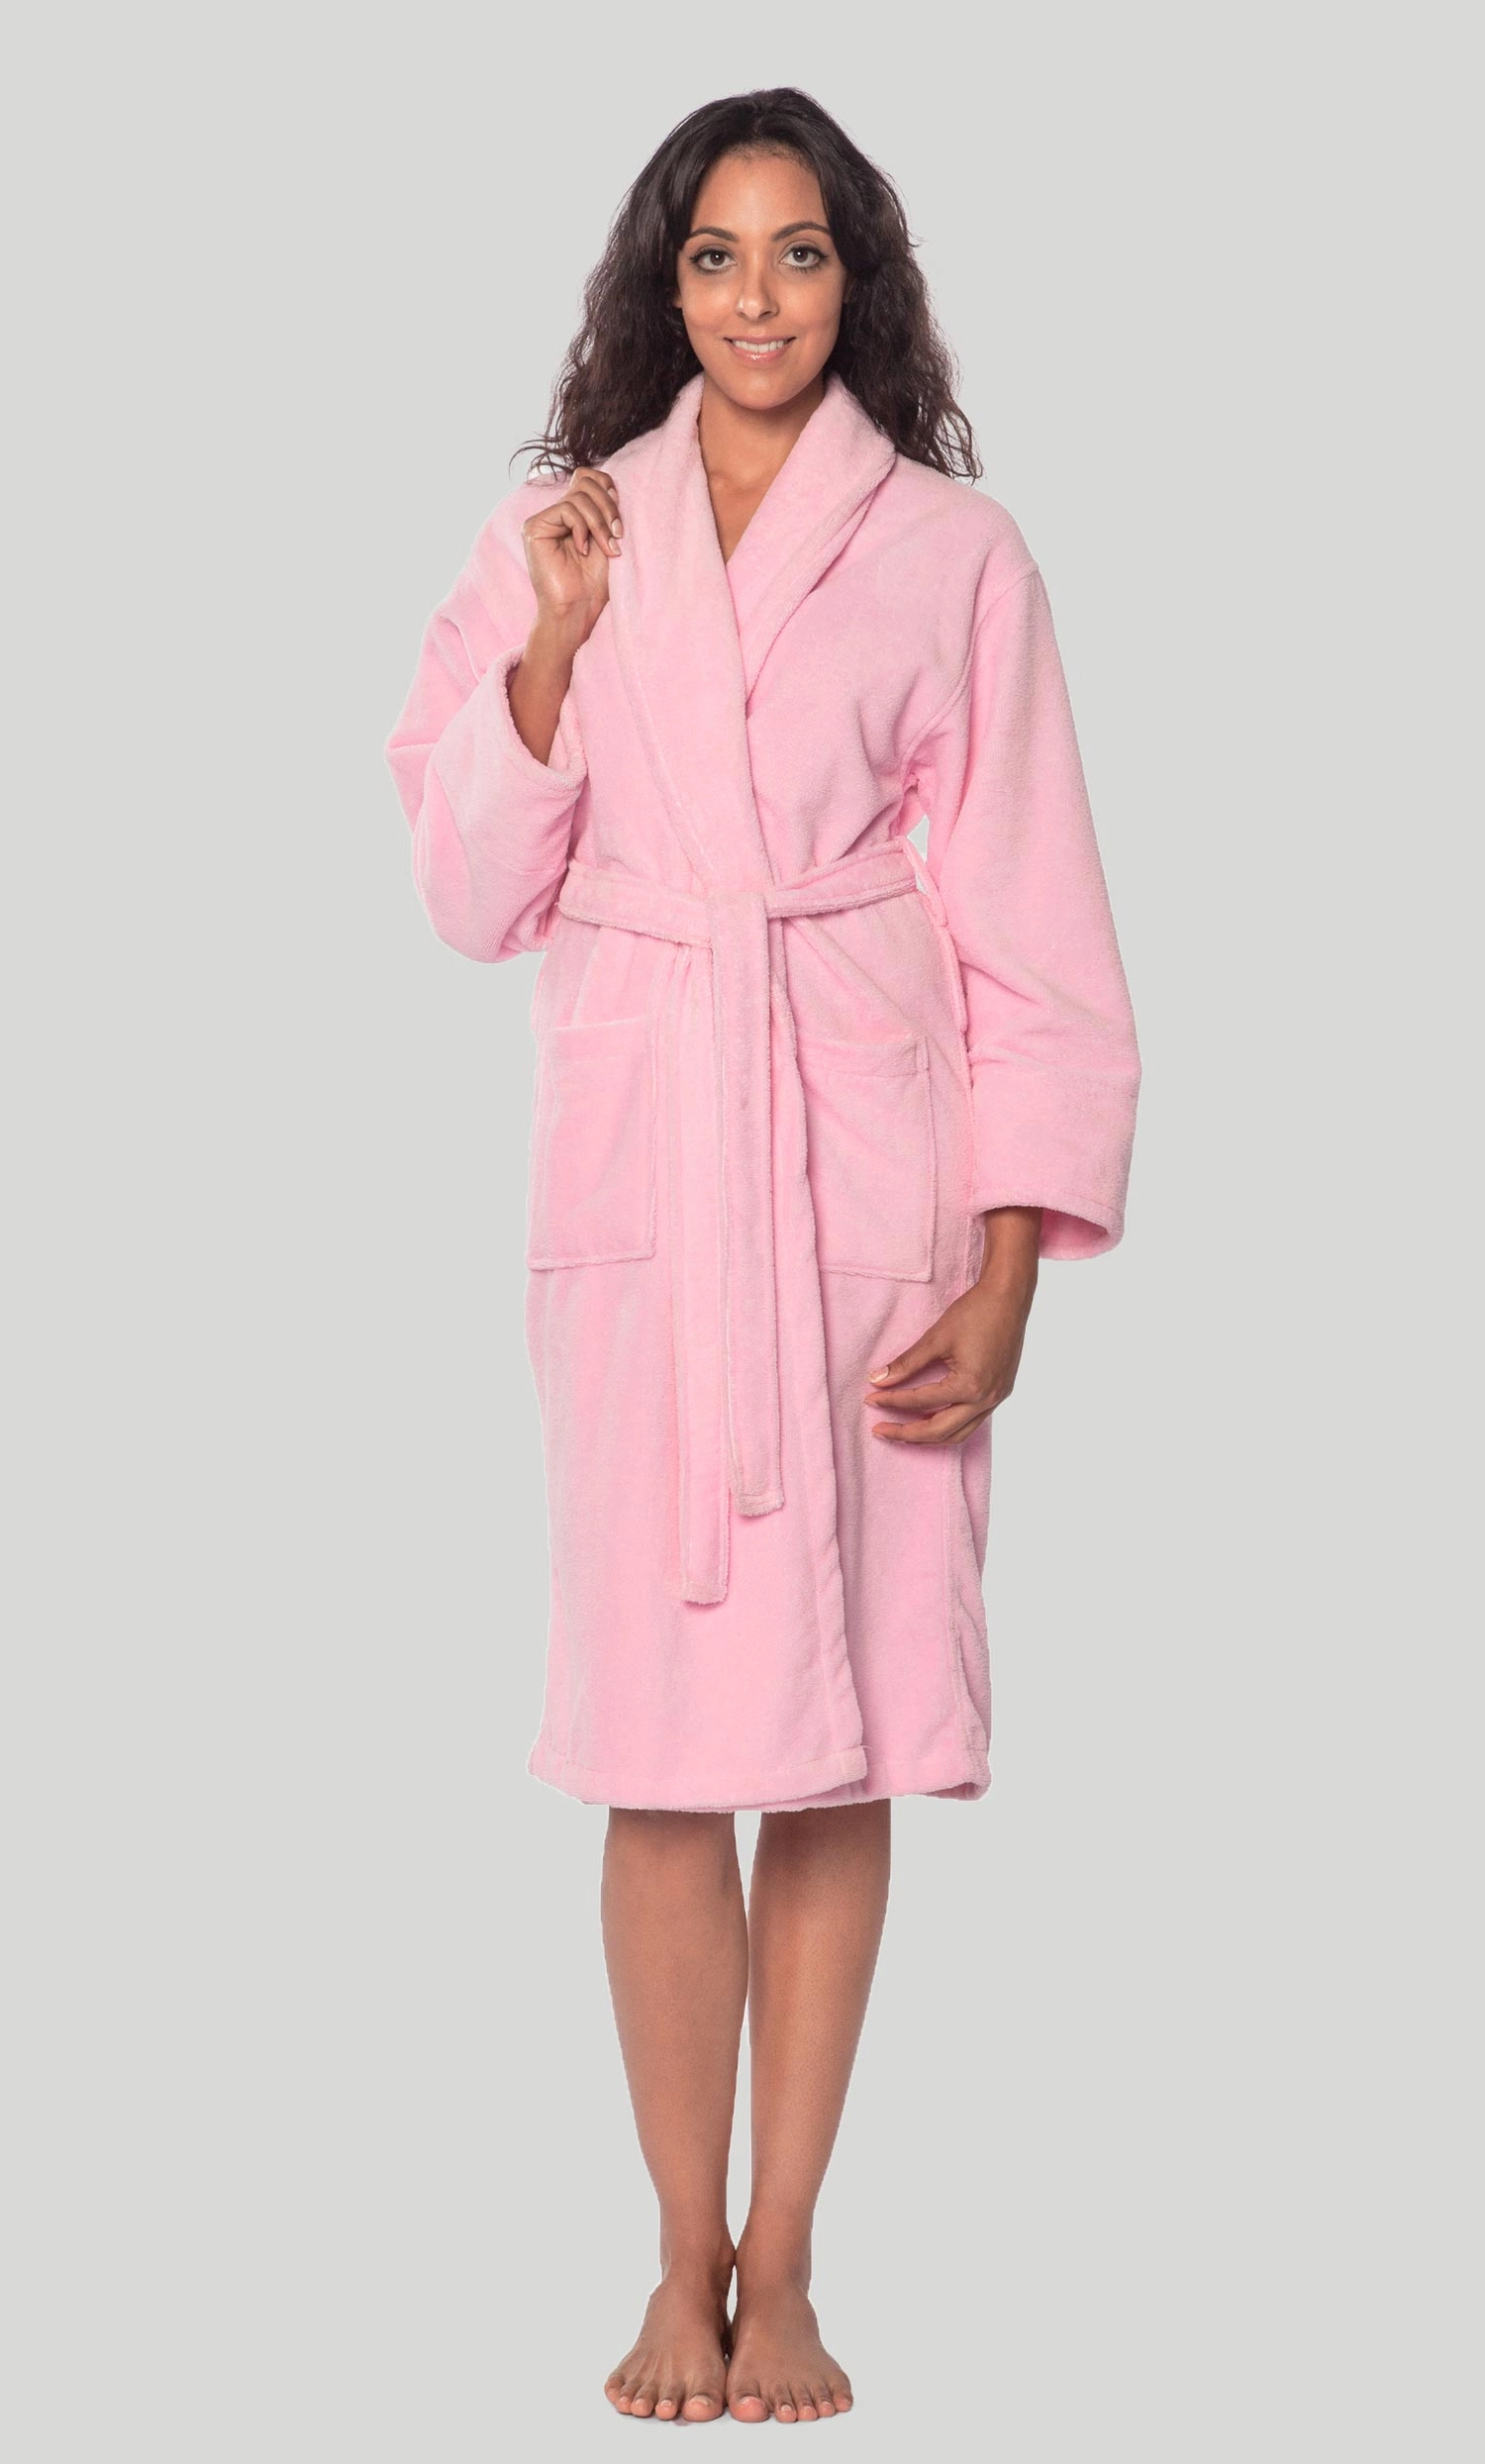 Women's :: Luxury Microfiber Plush Lined Robe Pink - Wholesale bathrobes,  Spa robes, Kids robes, Cotton robes, Spa Slippers, Wholesale Towels